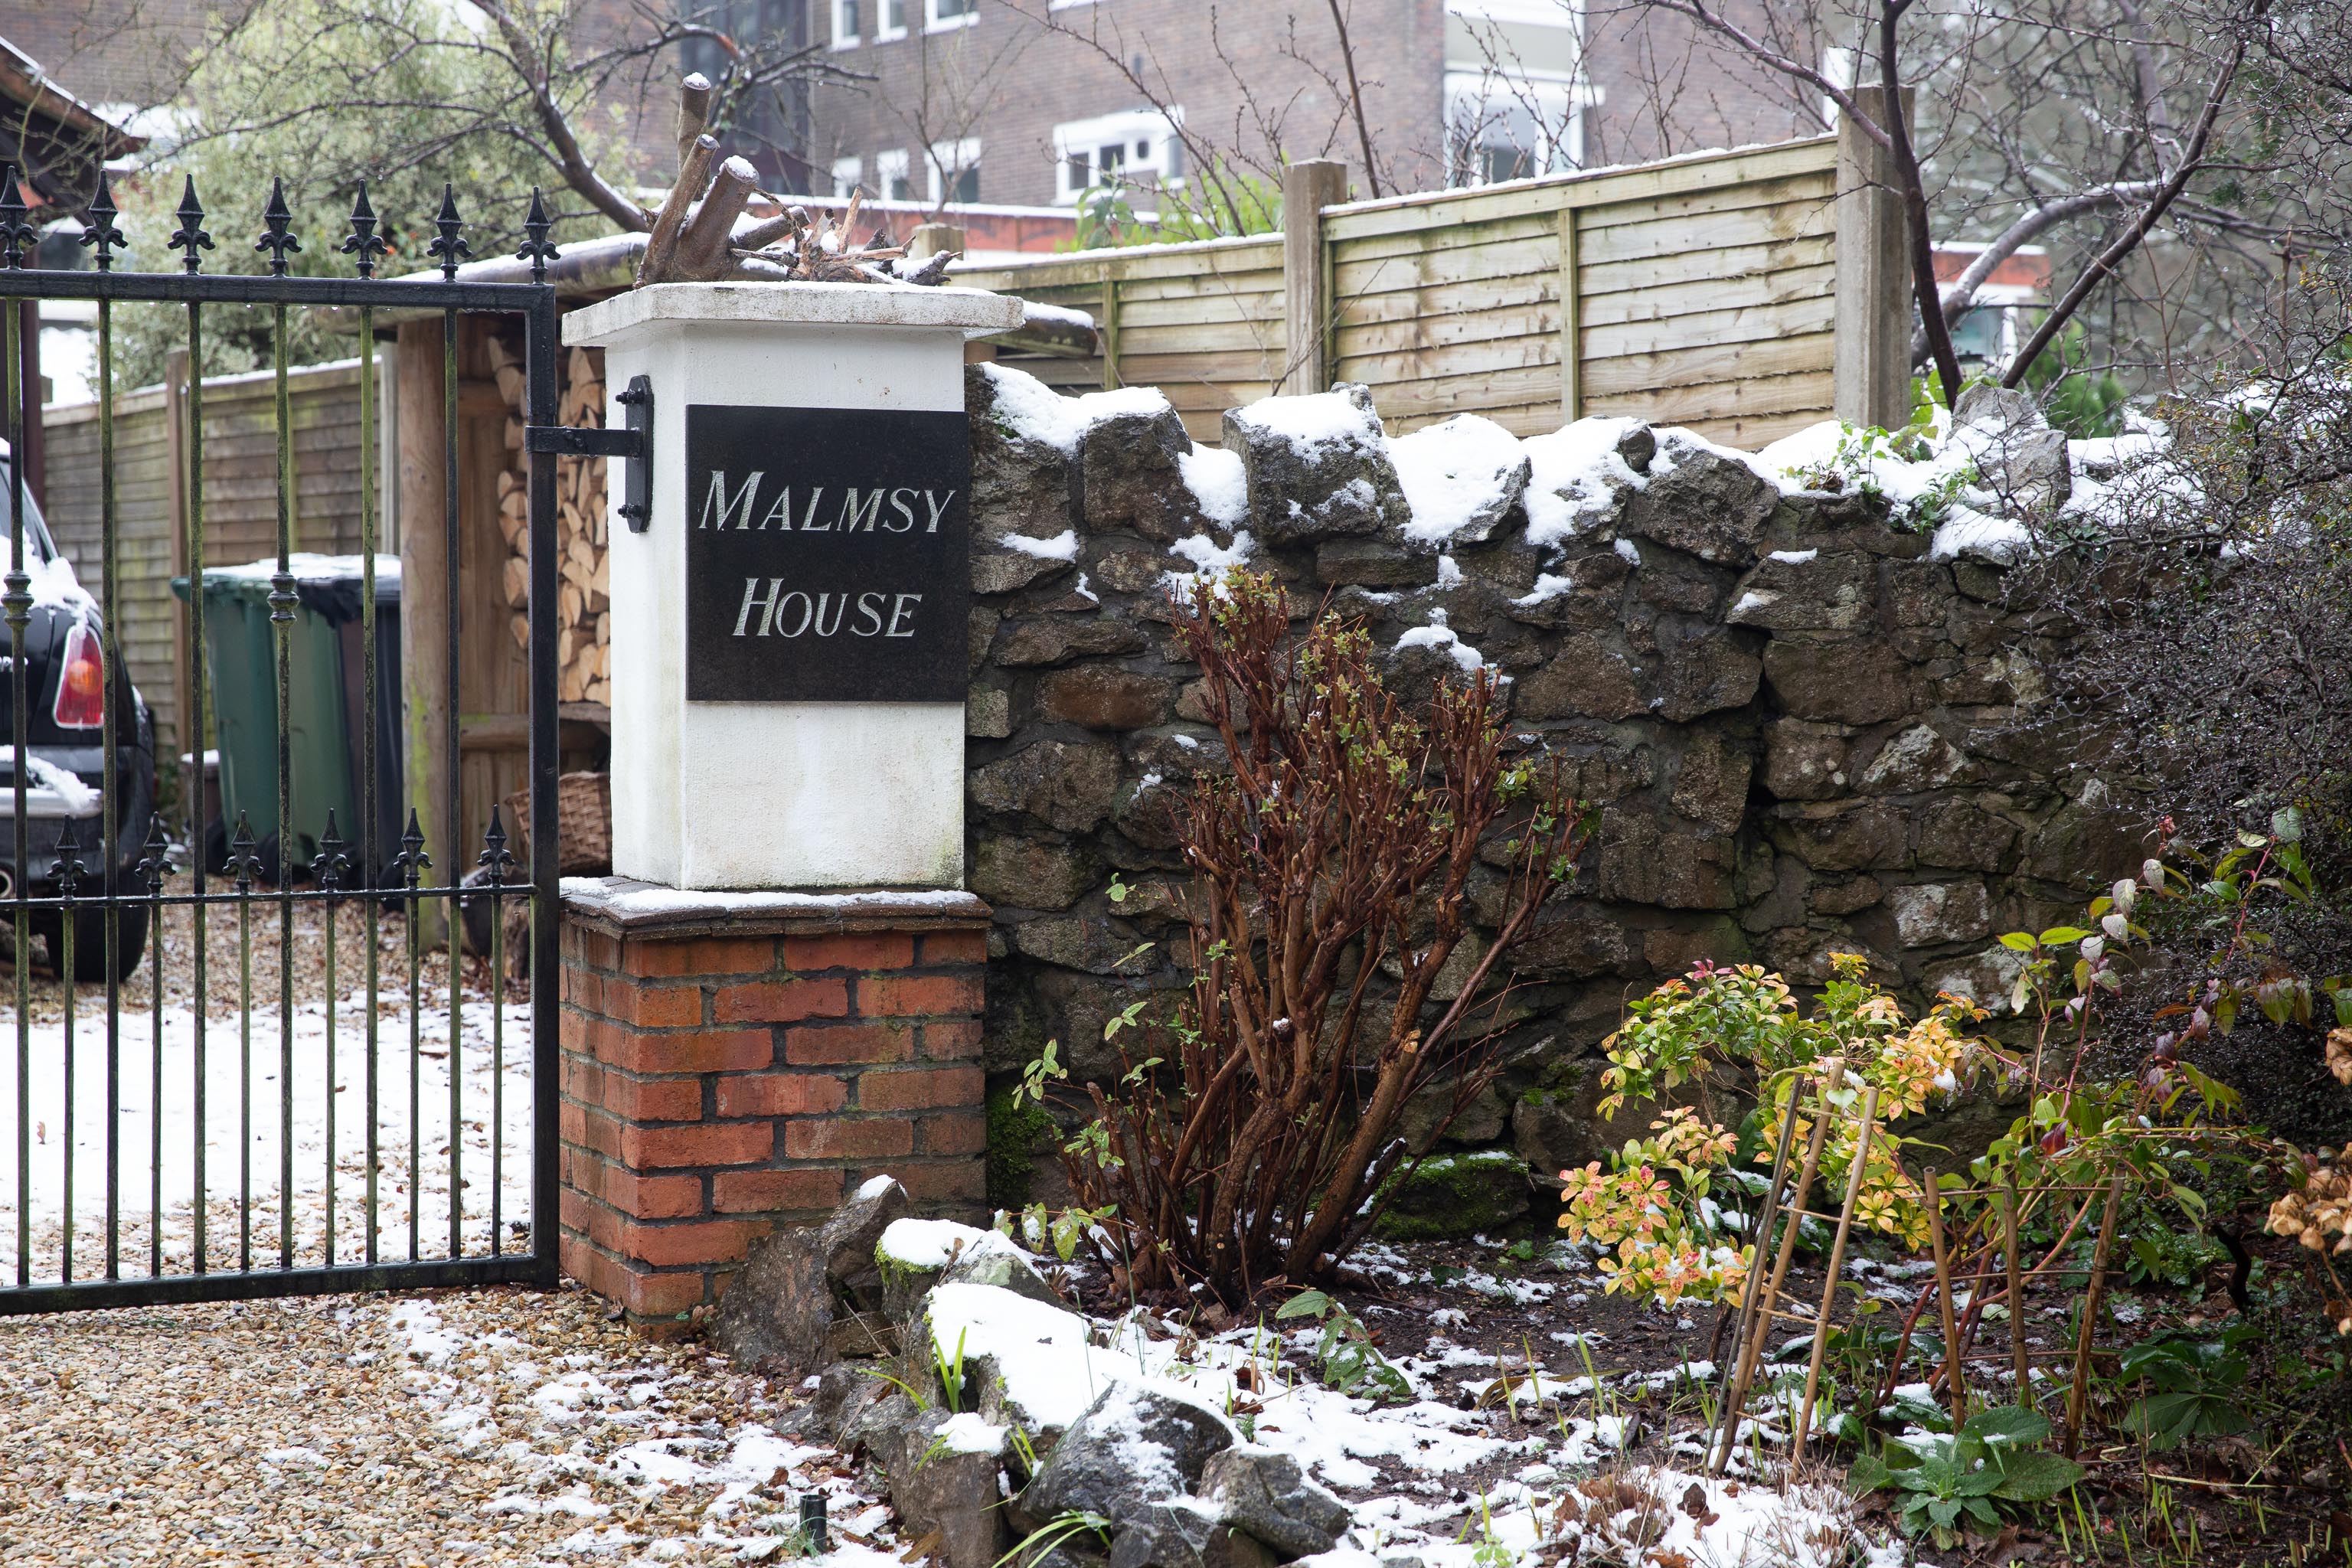 Malmsy House
And next to Chakas Kraal is Malmsy House. It sounds like a vaguely insulting epithet from a Bertie Wooster story to me. "Just get on with it, you m...